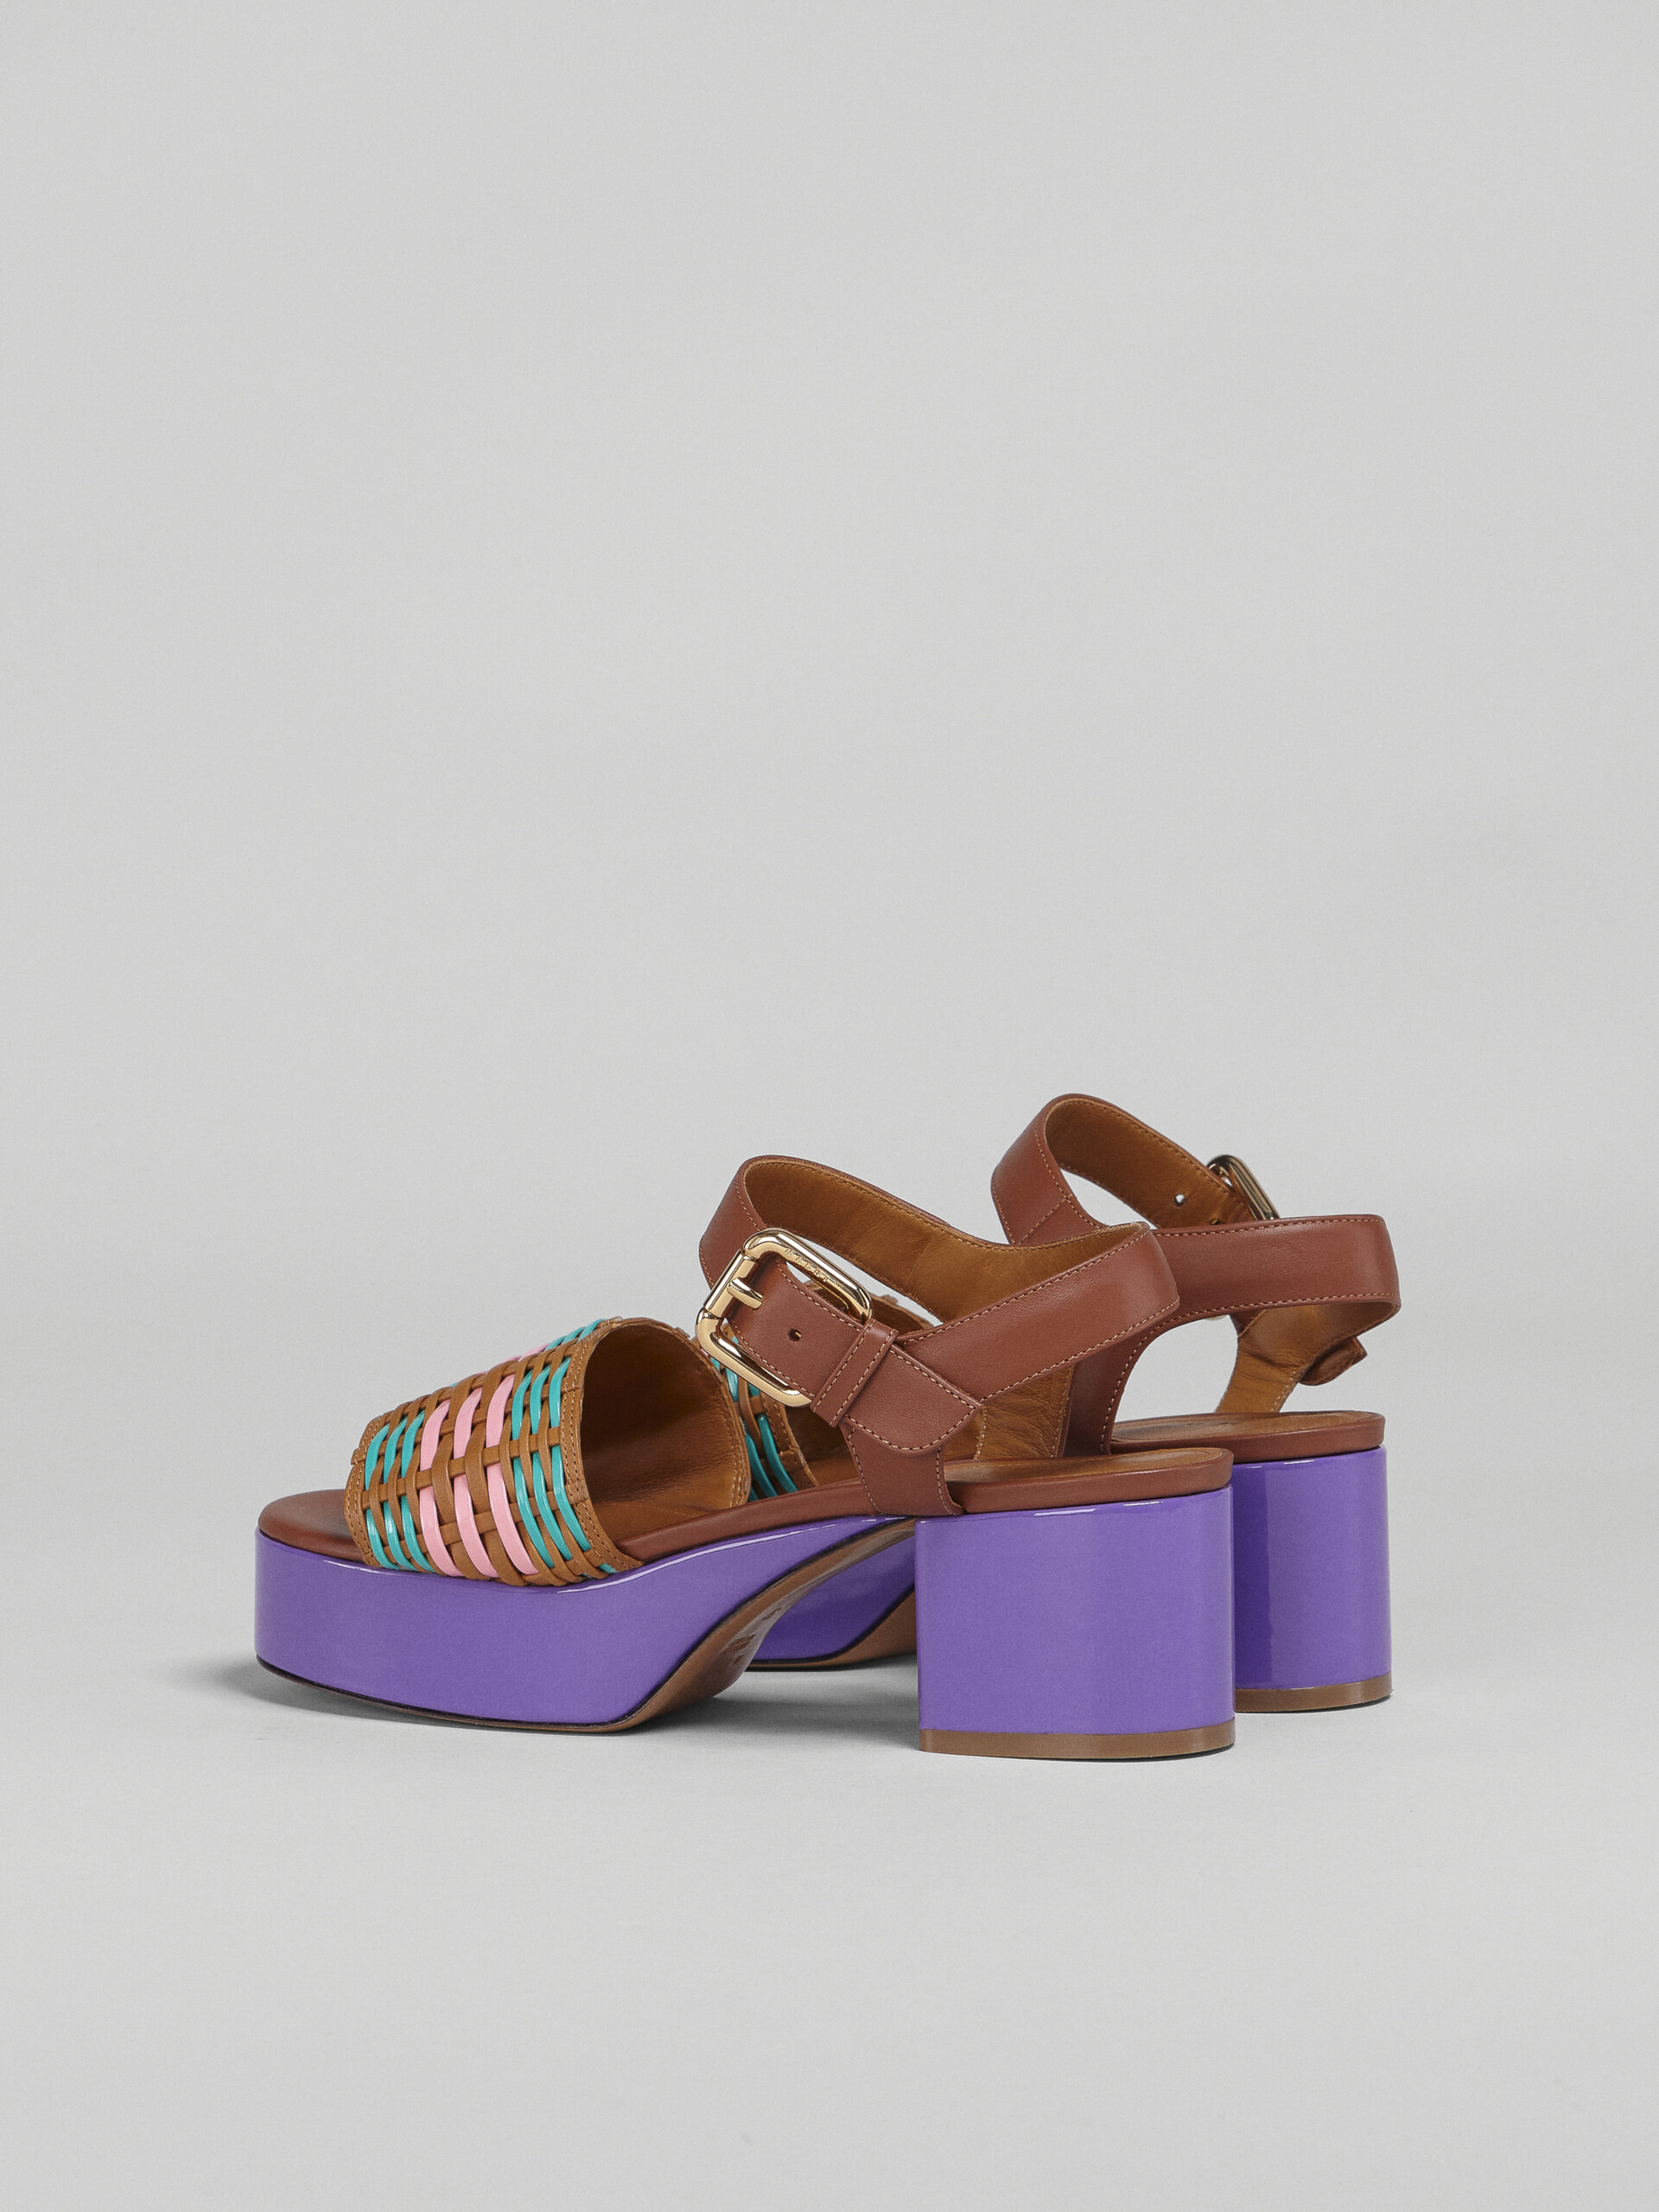 Hand woven vegetable-tanned leather sandal - Sandals - Image 3